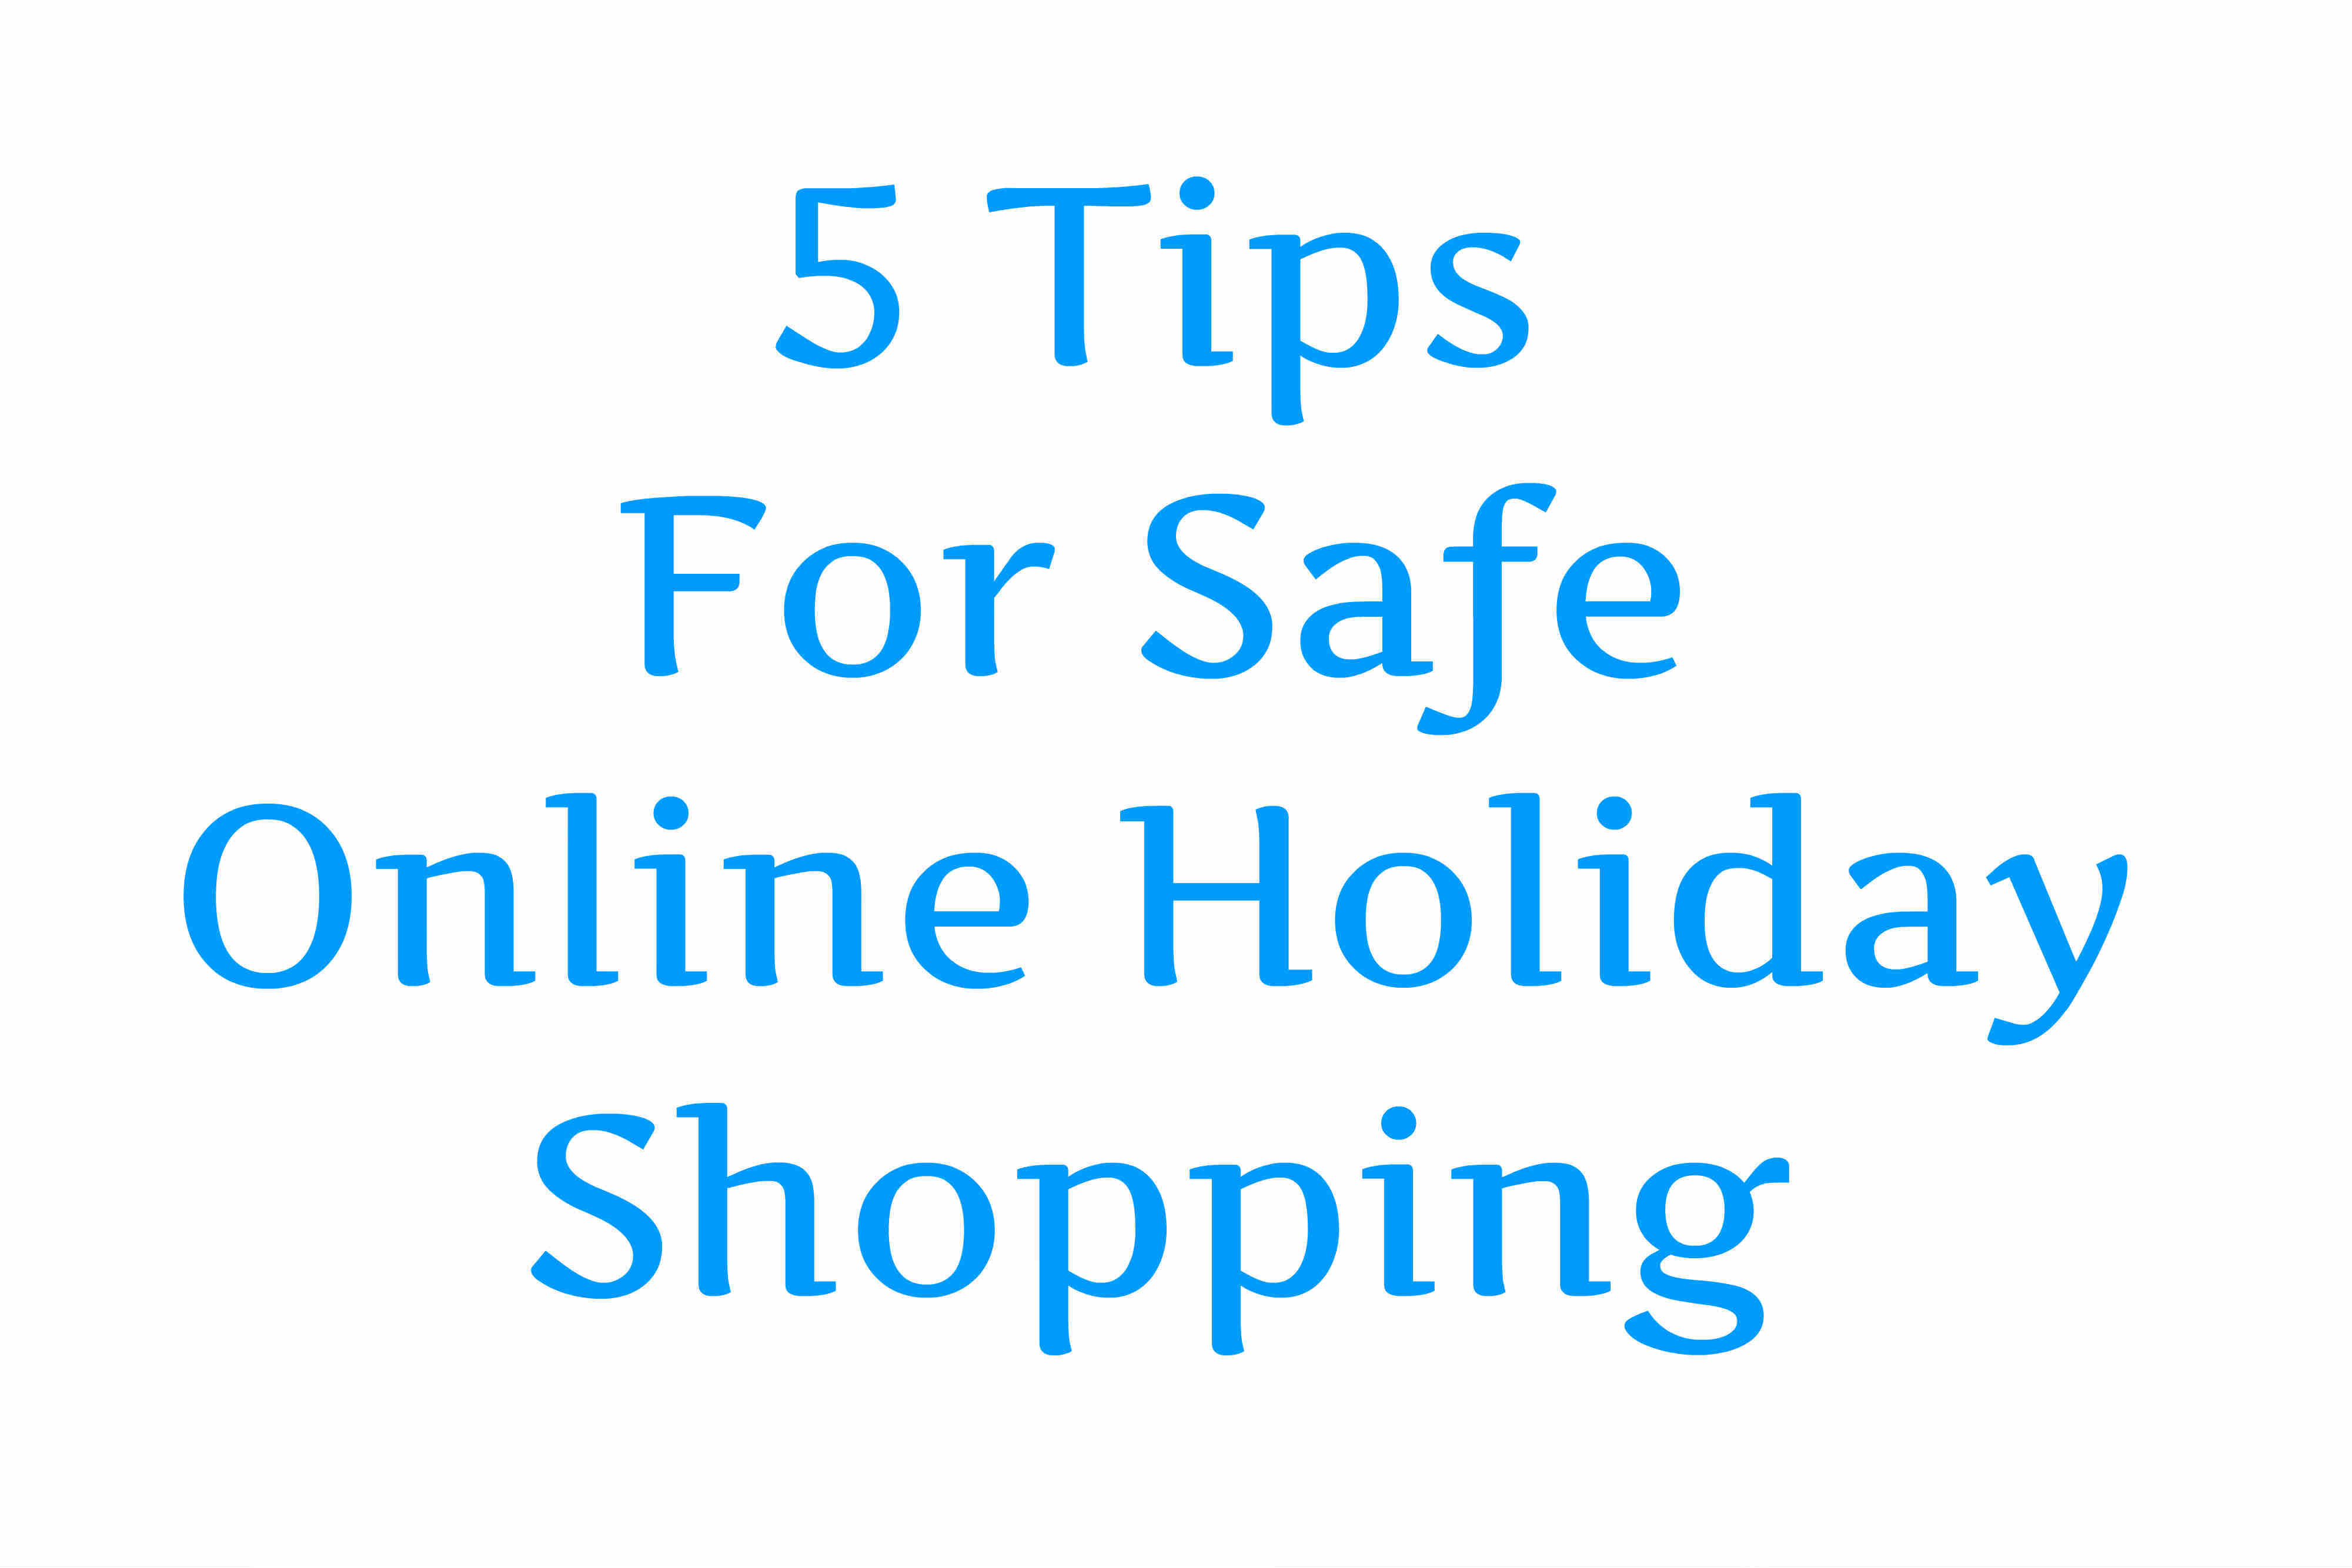 5 Tips For Safe Online Holiday Shopping